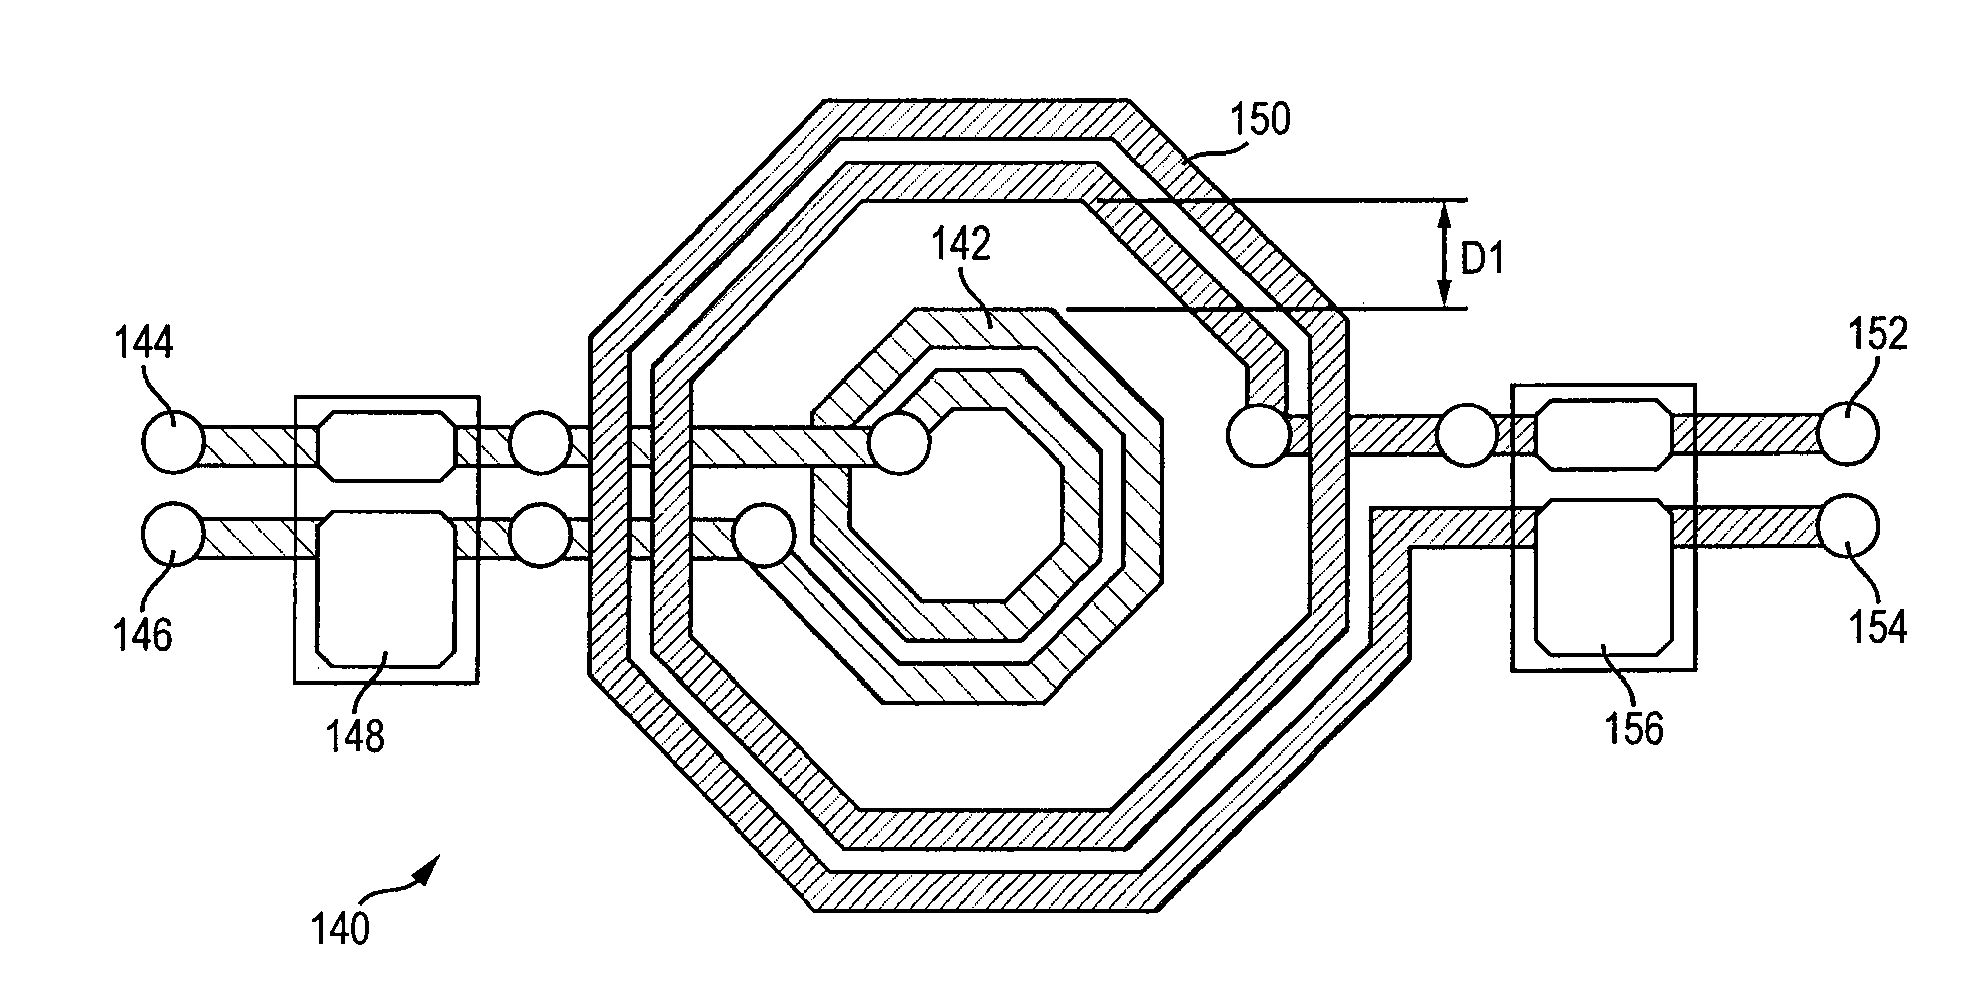 Semiconductor Device and Method of Forming RF Balun Having Reduced Capacitive Coupling and High CMRR